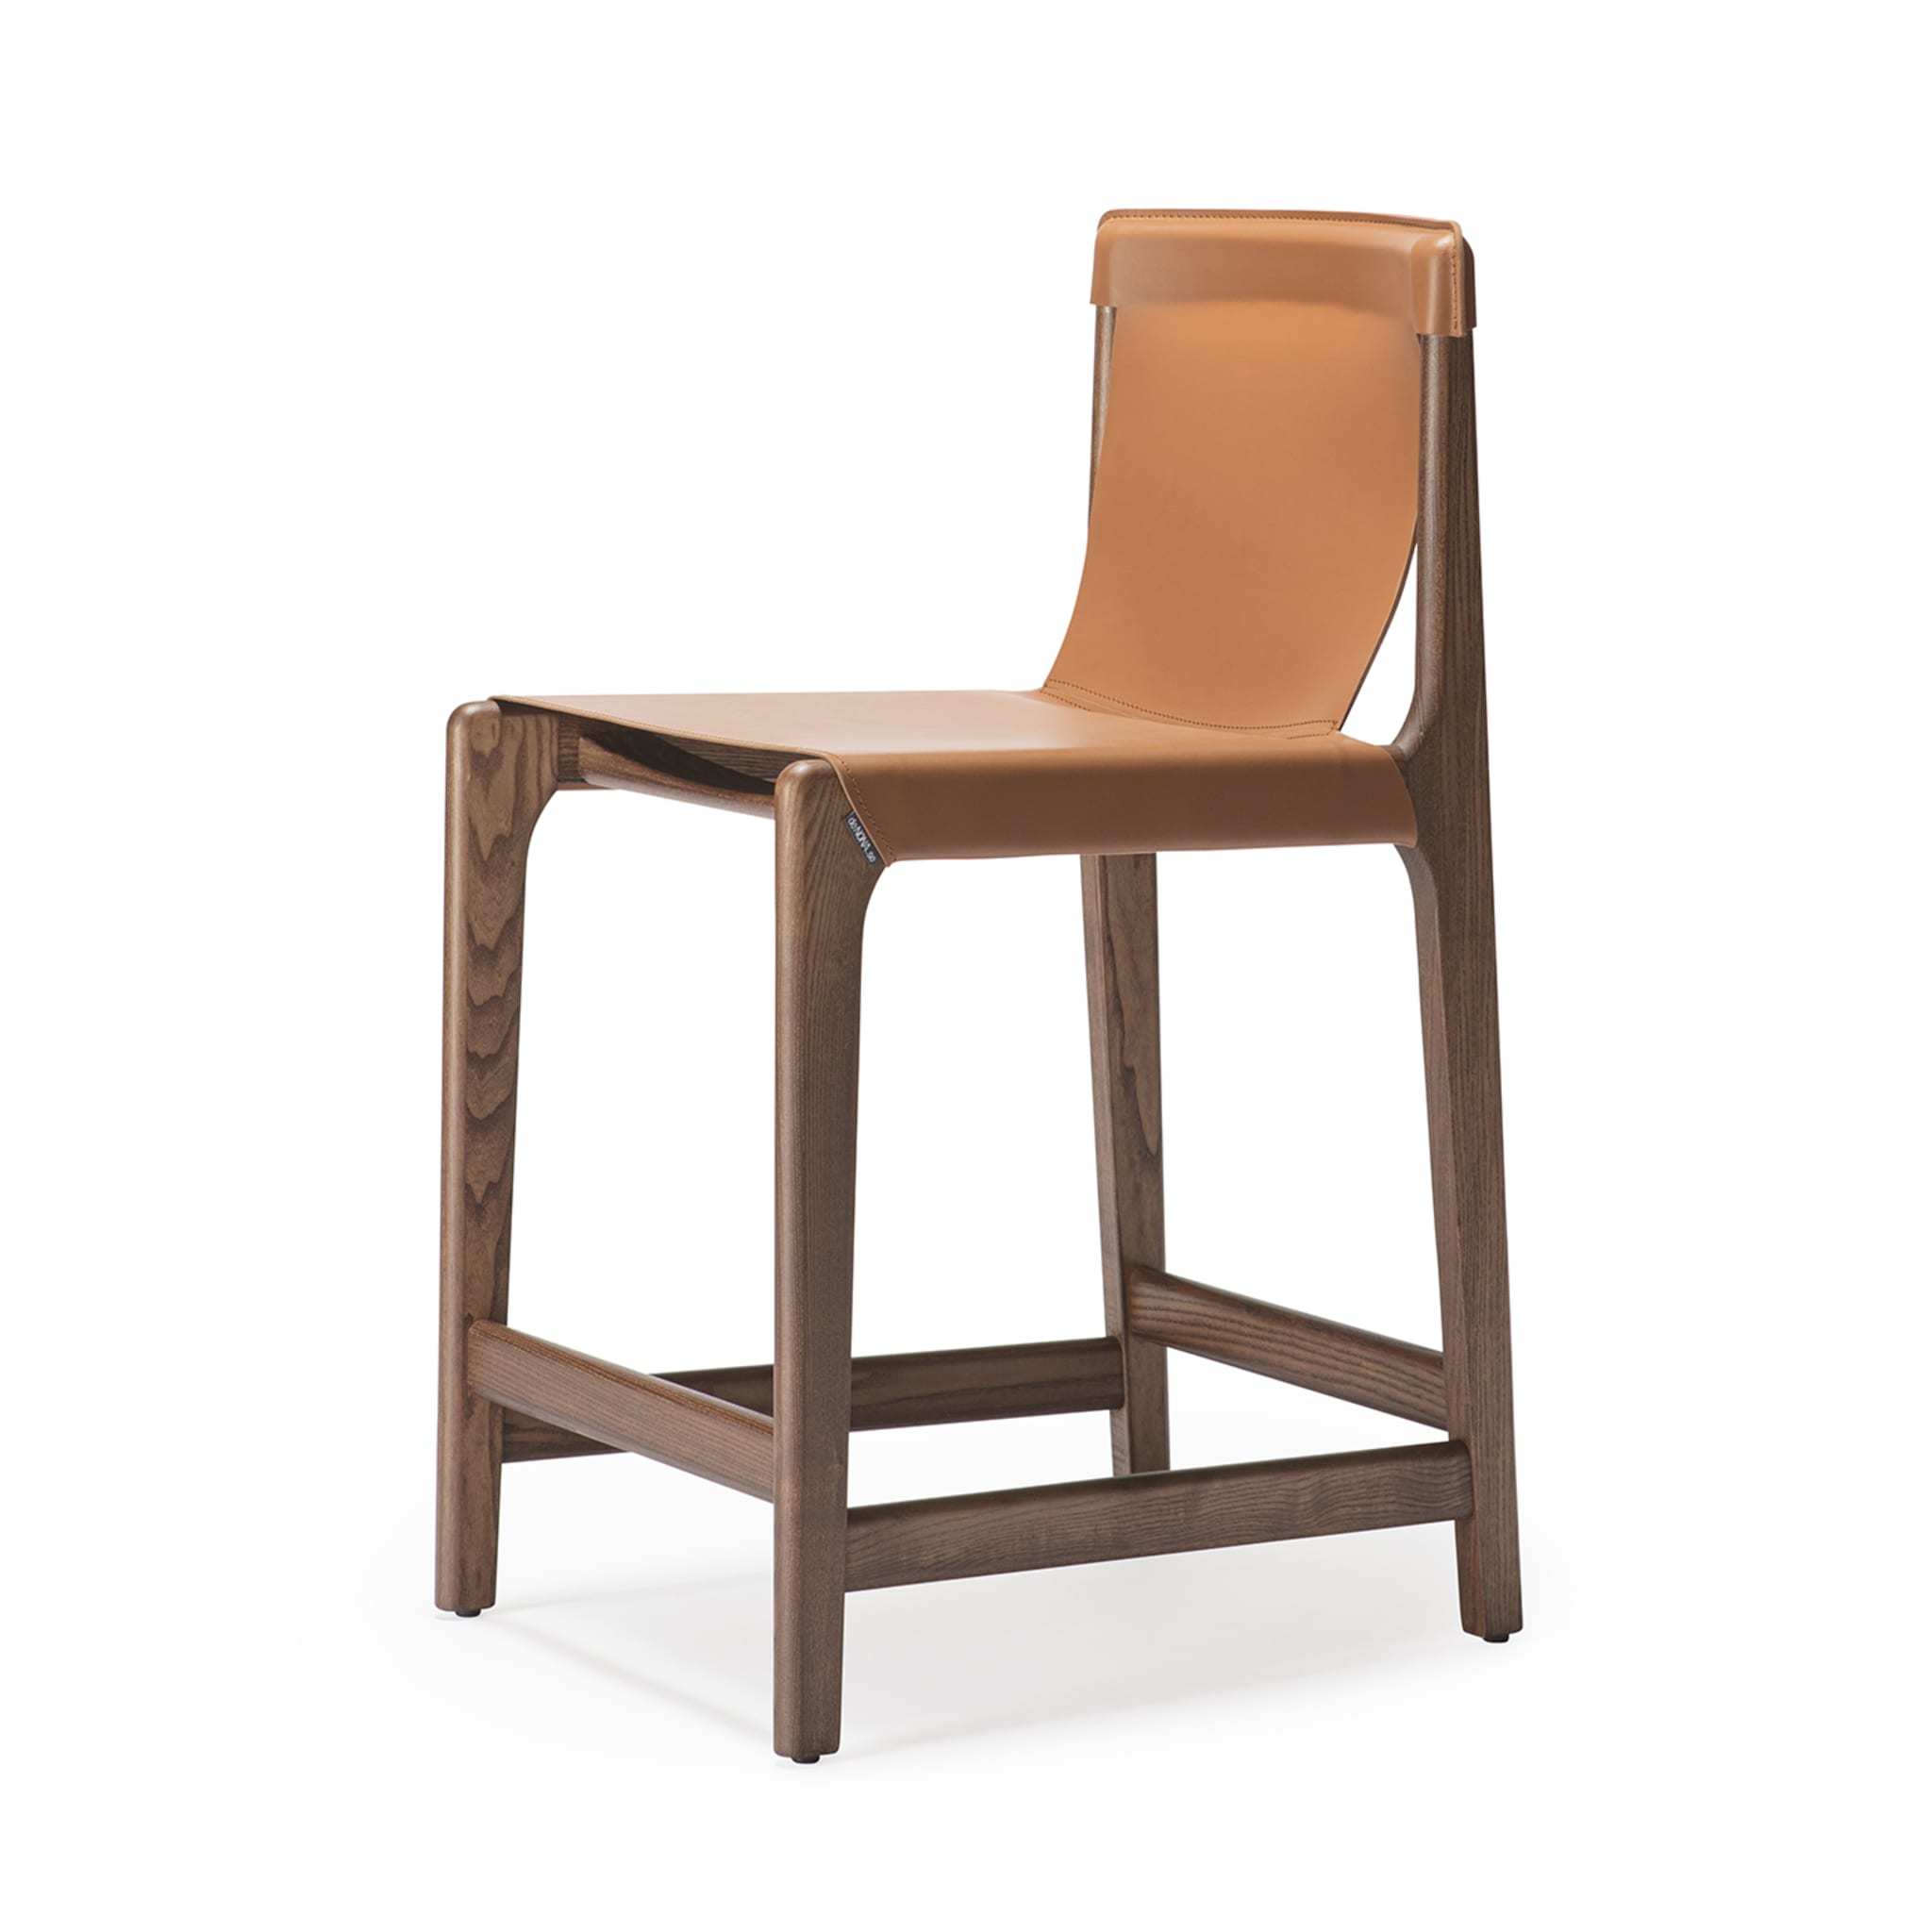 Burano/sg 24 Brown Leather Counter Stool by Balutto Associati - Alternative view 2